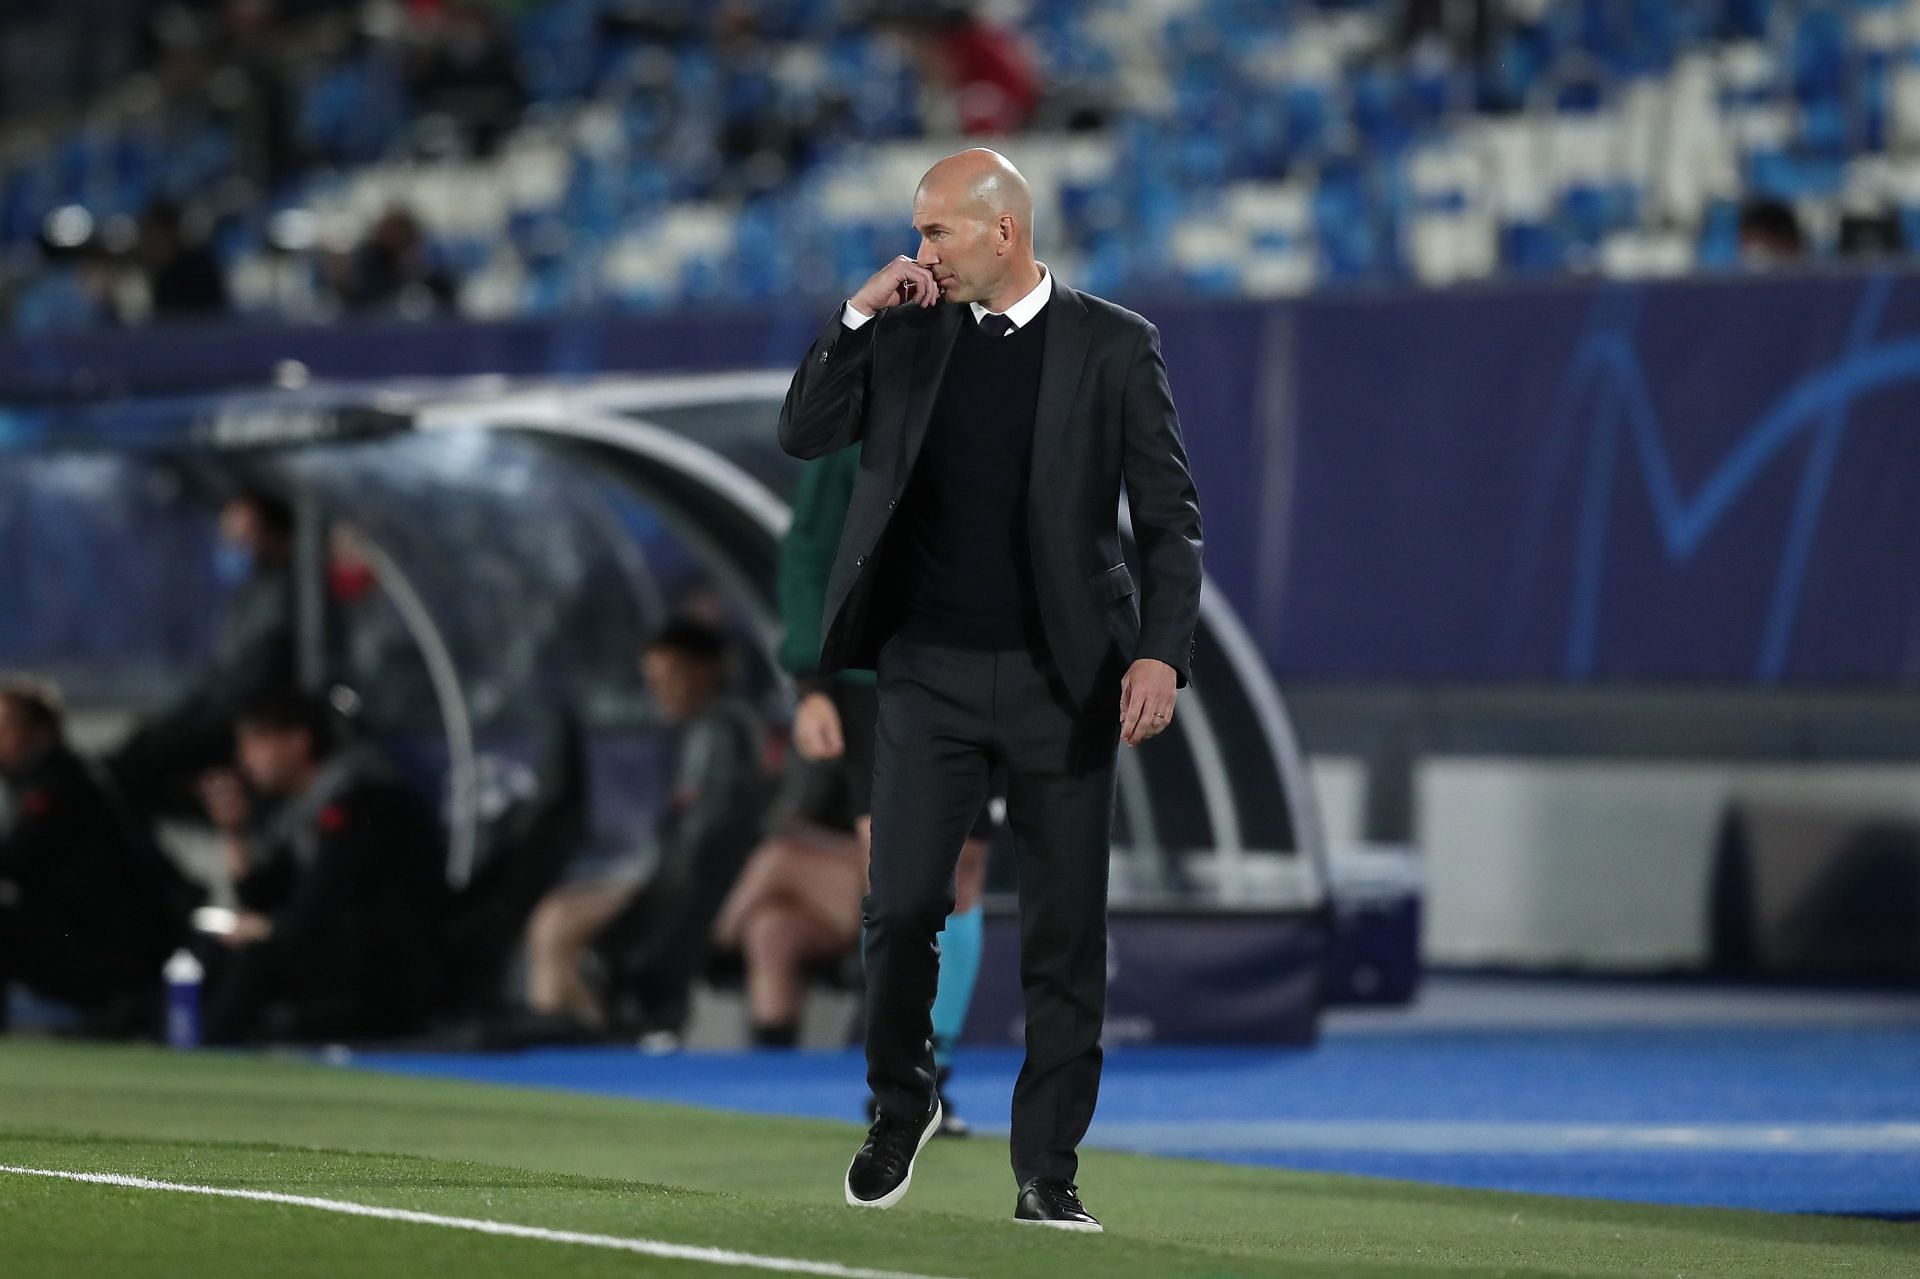 Zinedine Zidane has not shown any interest in taking up the job at United, so far